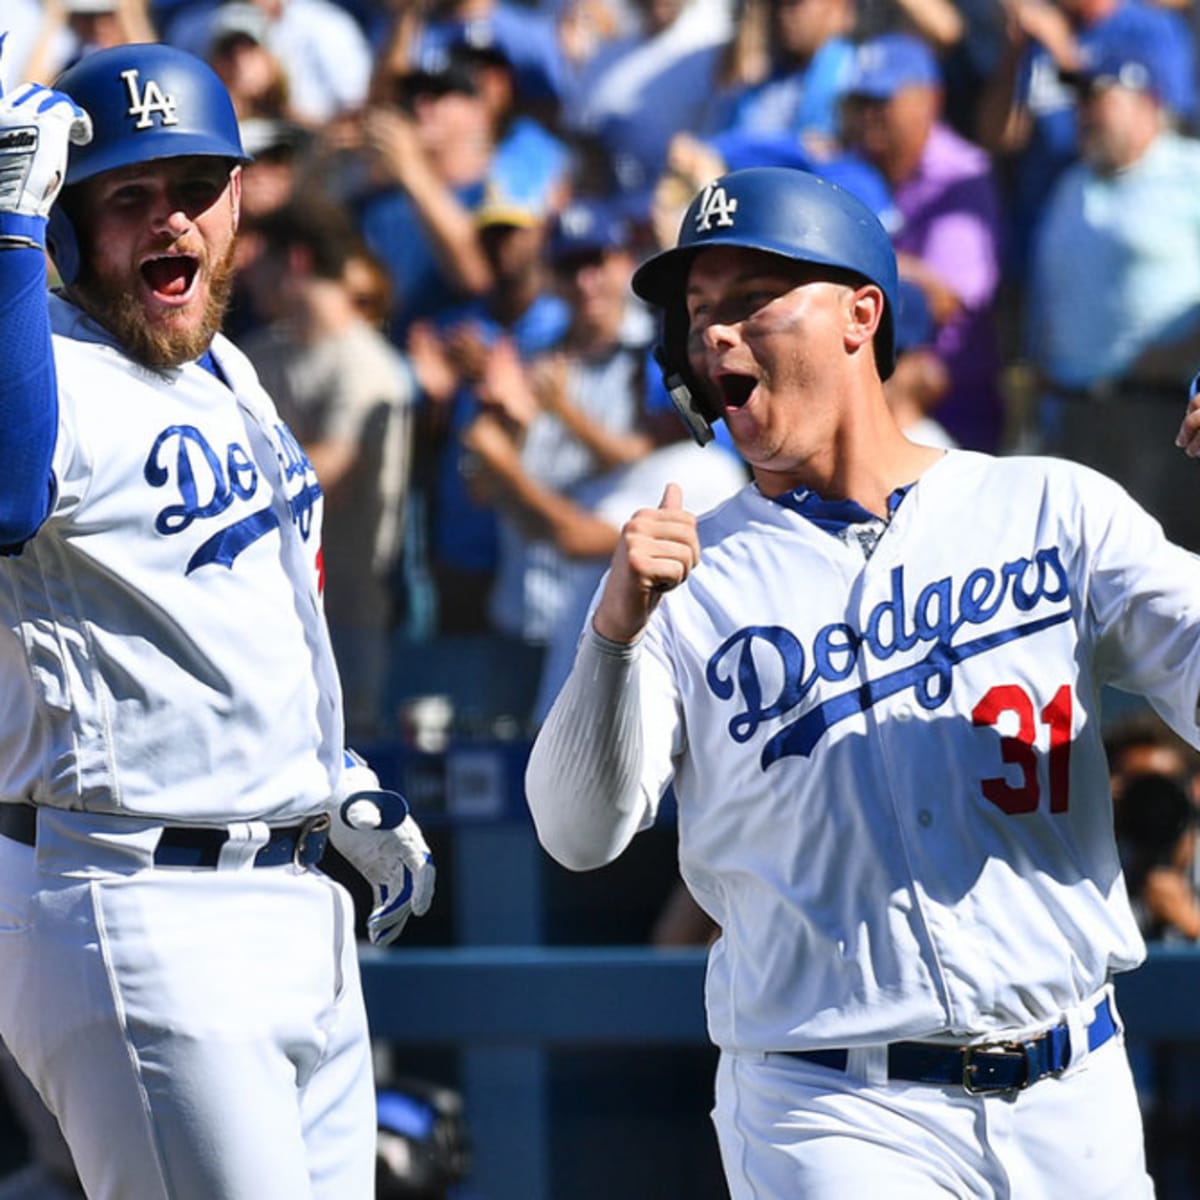 Dodgers beat the Pirates 5-2 to pull within a half-game of NL West